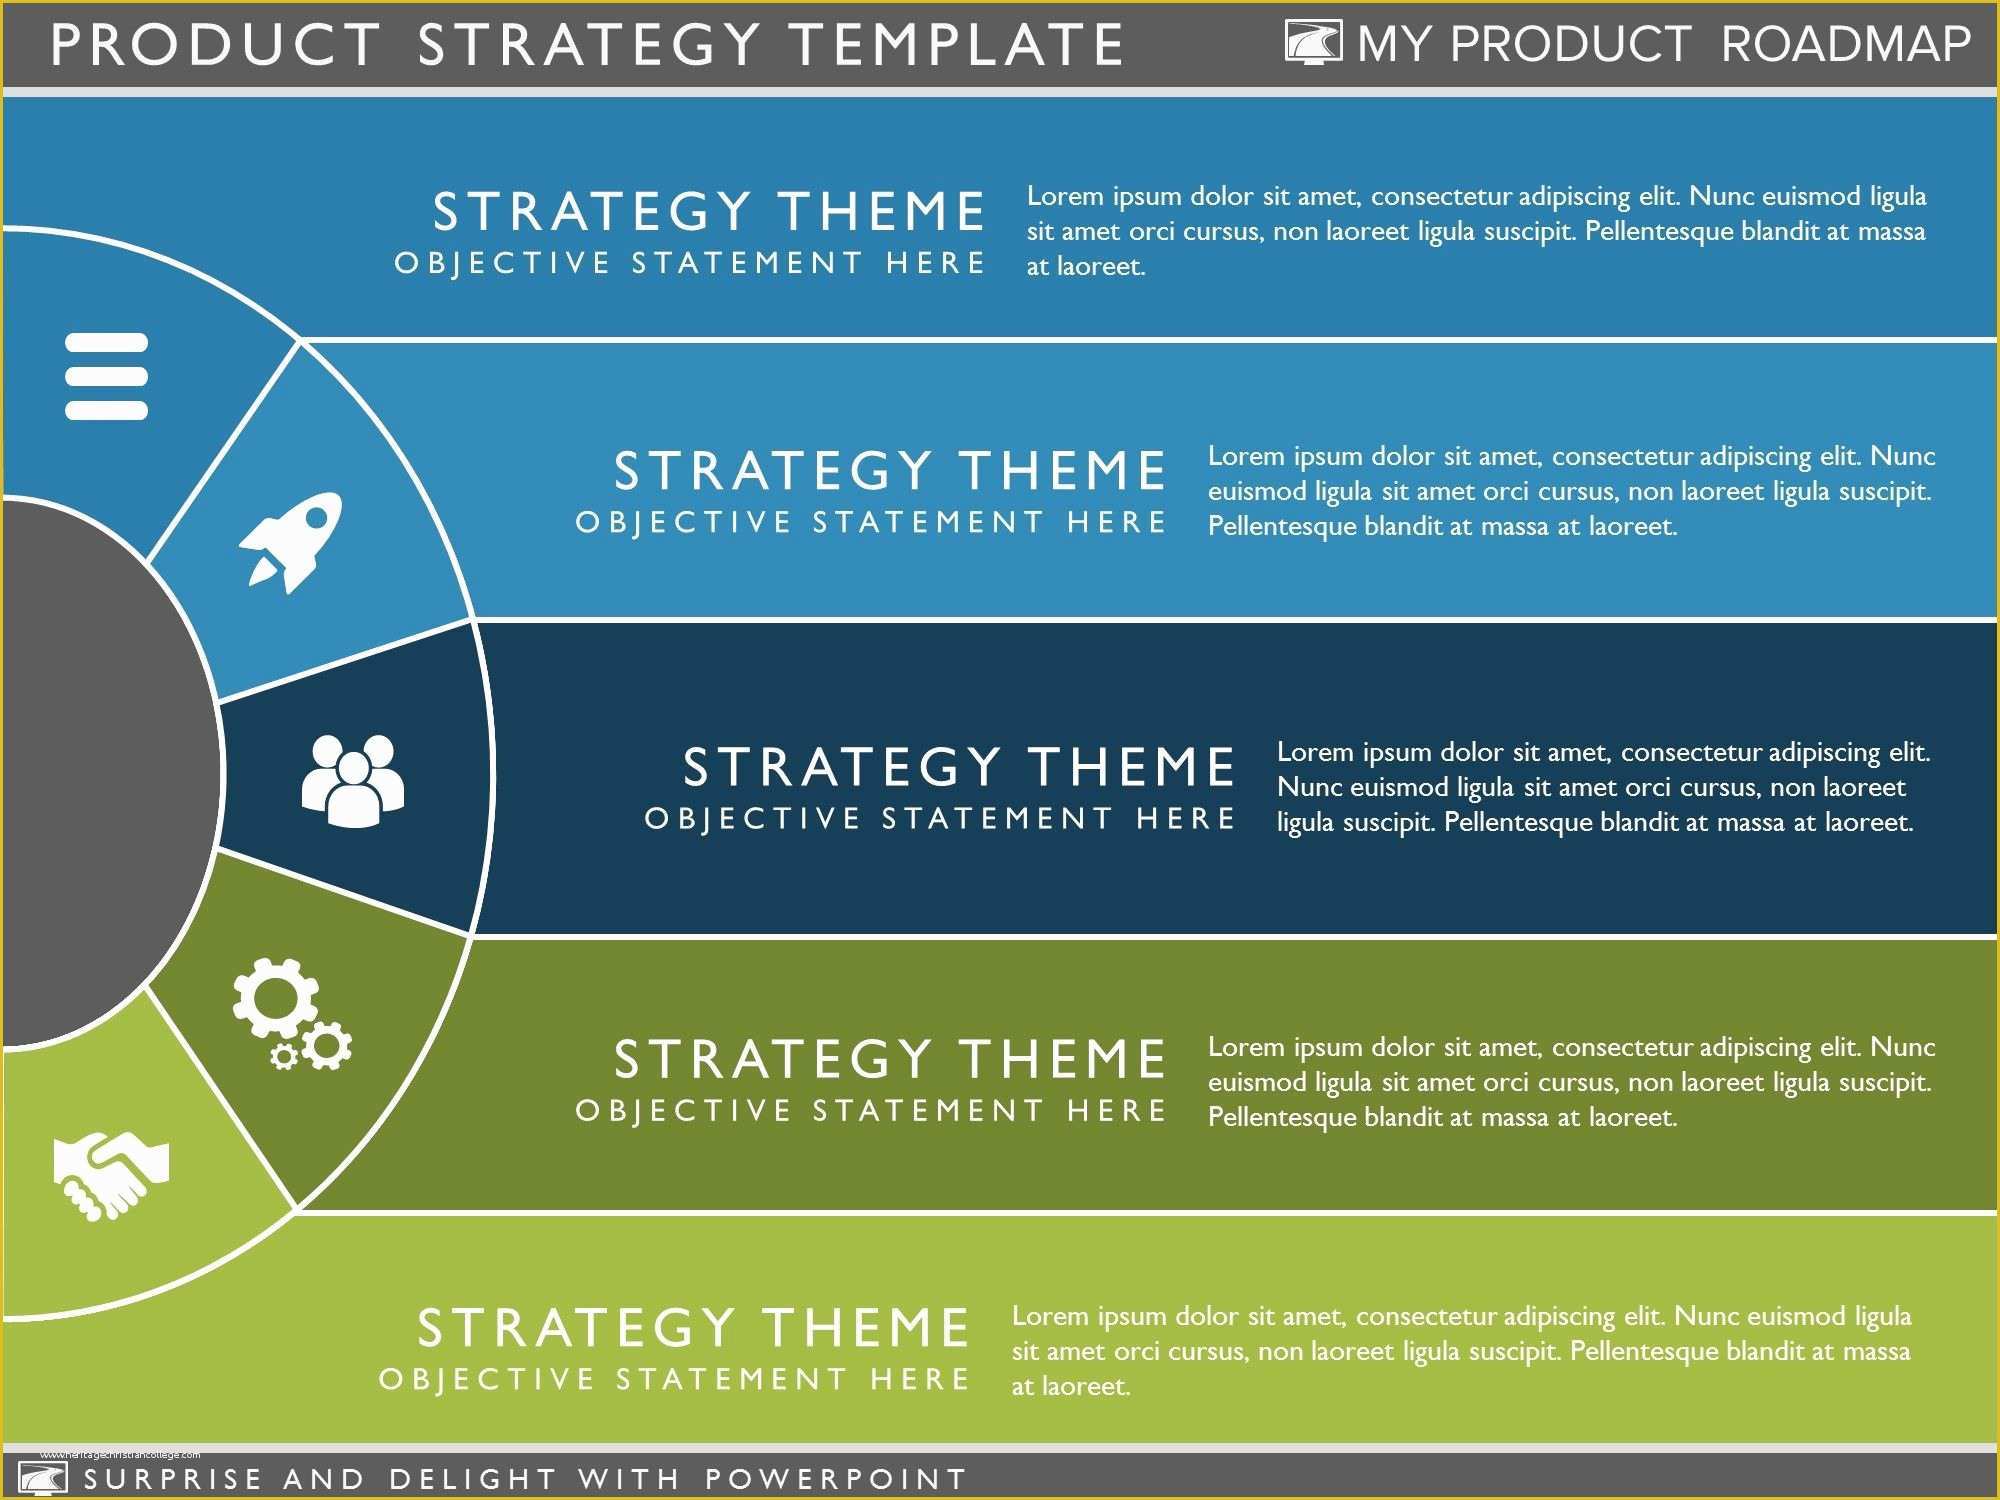 Strategic Plan Powerpoint Template Free Of Product Strategy Template Clickfunnel Hacks